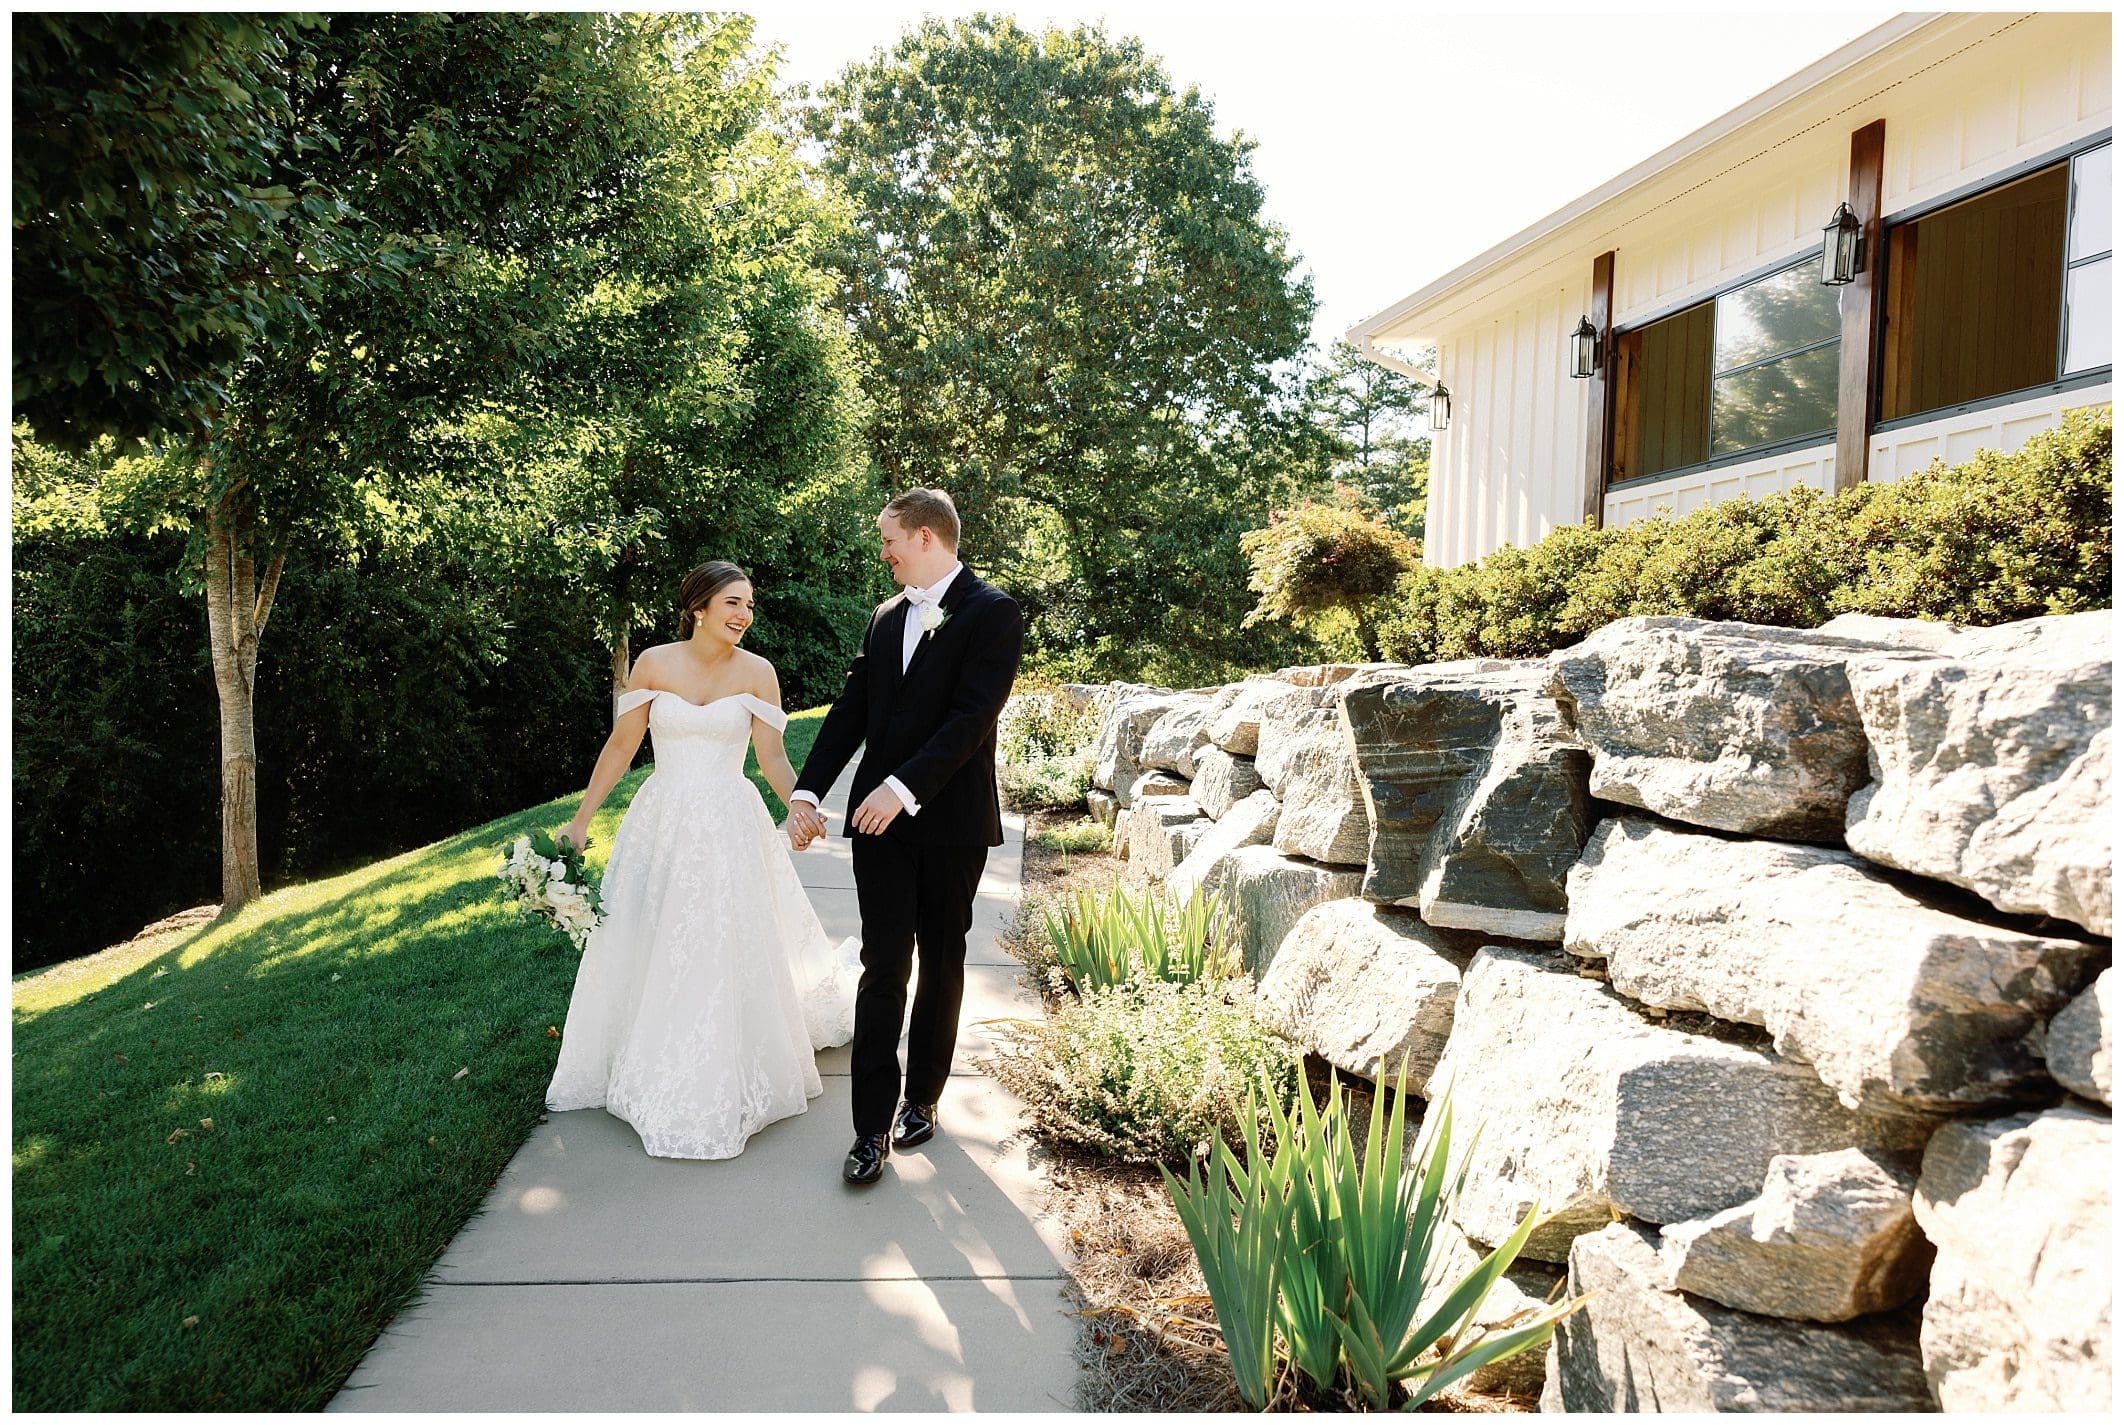 A bride and groom walking down a stone path.